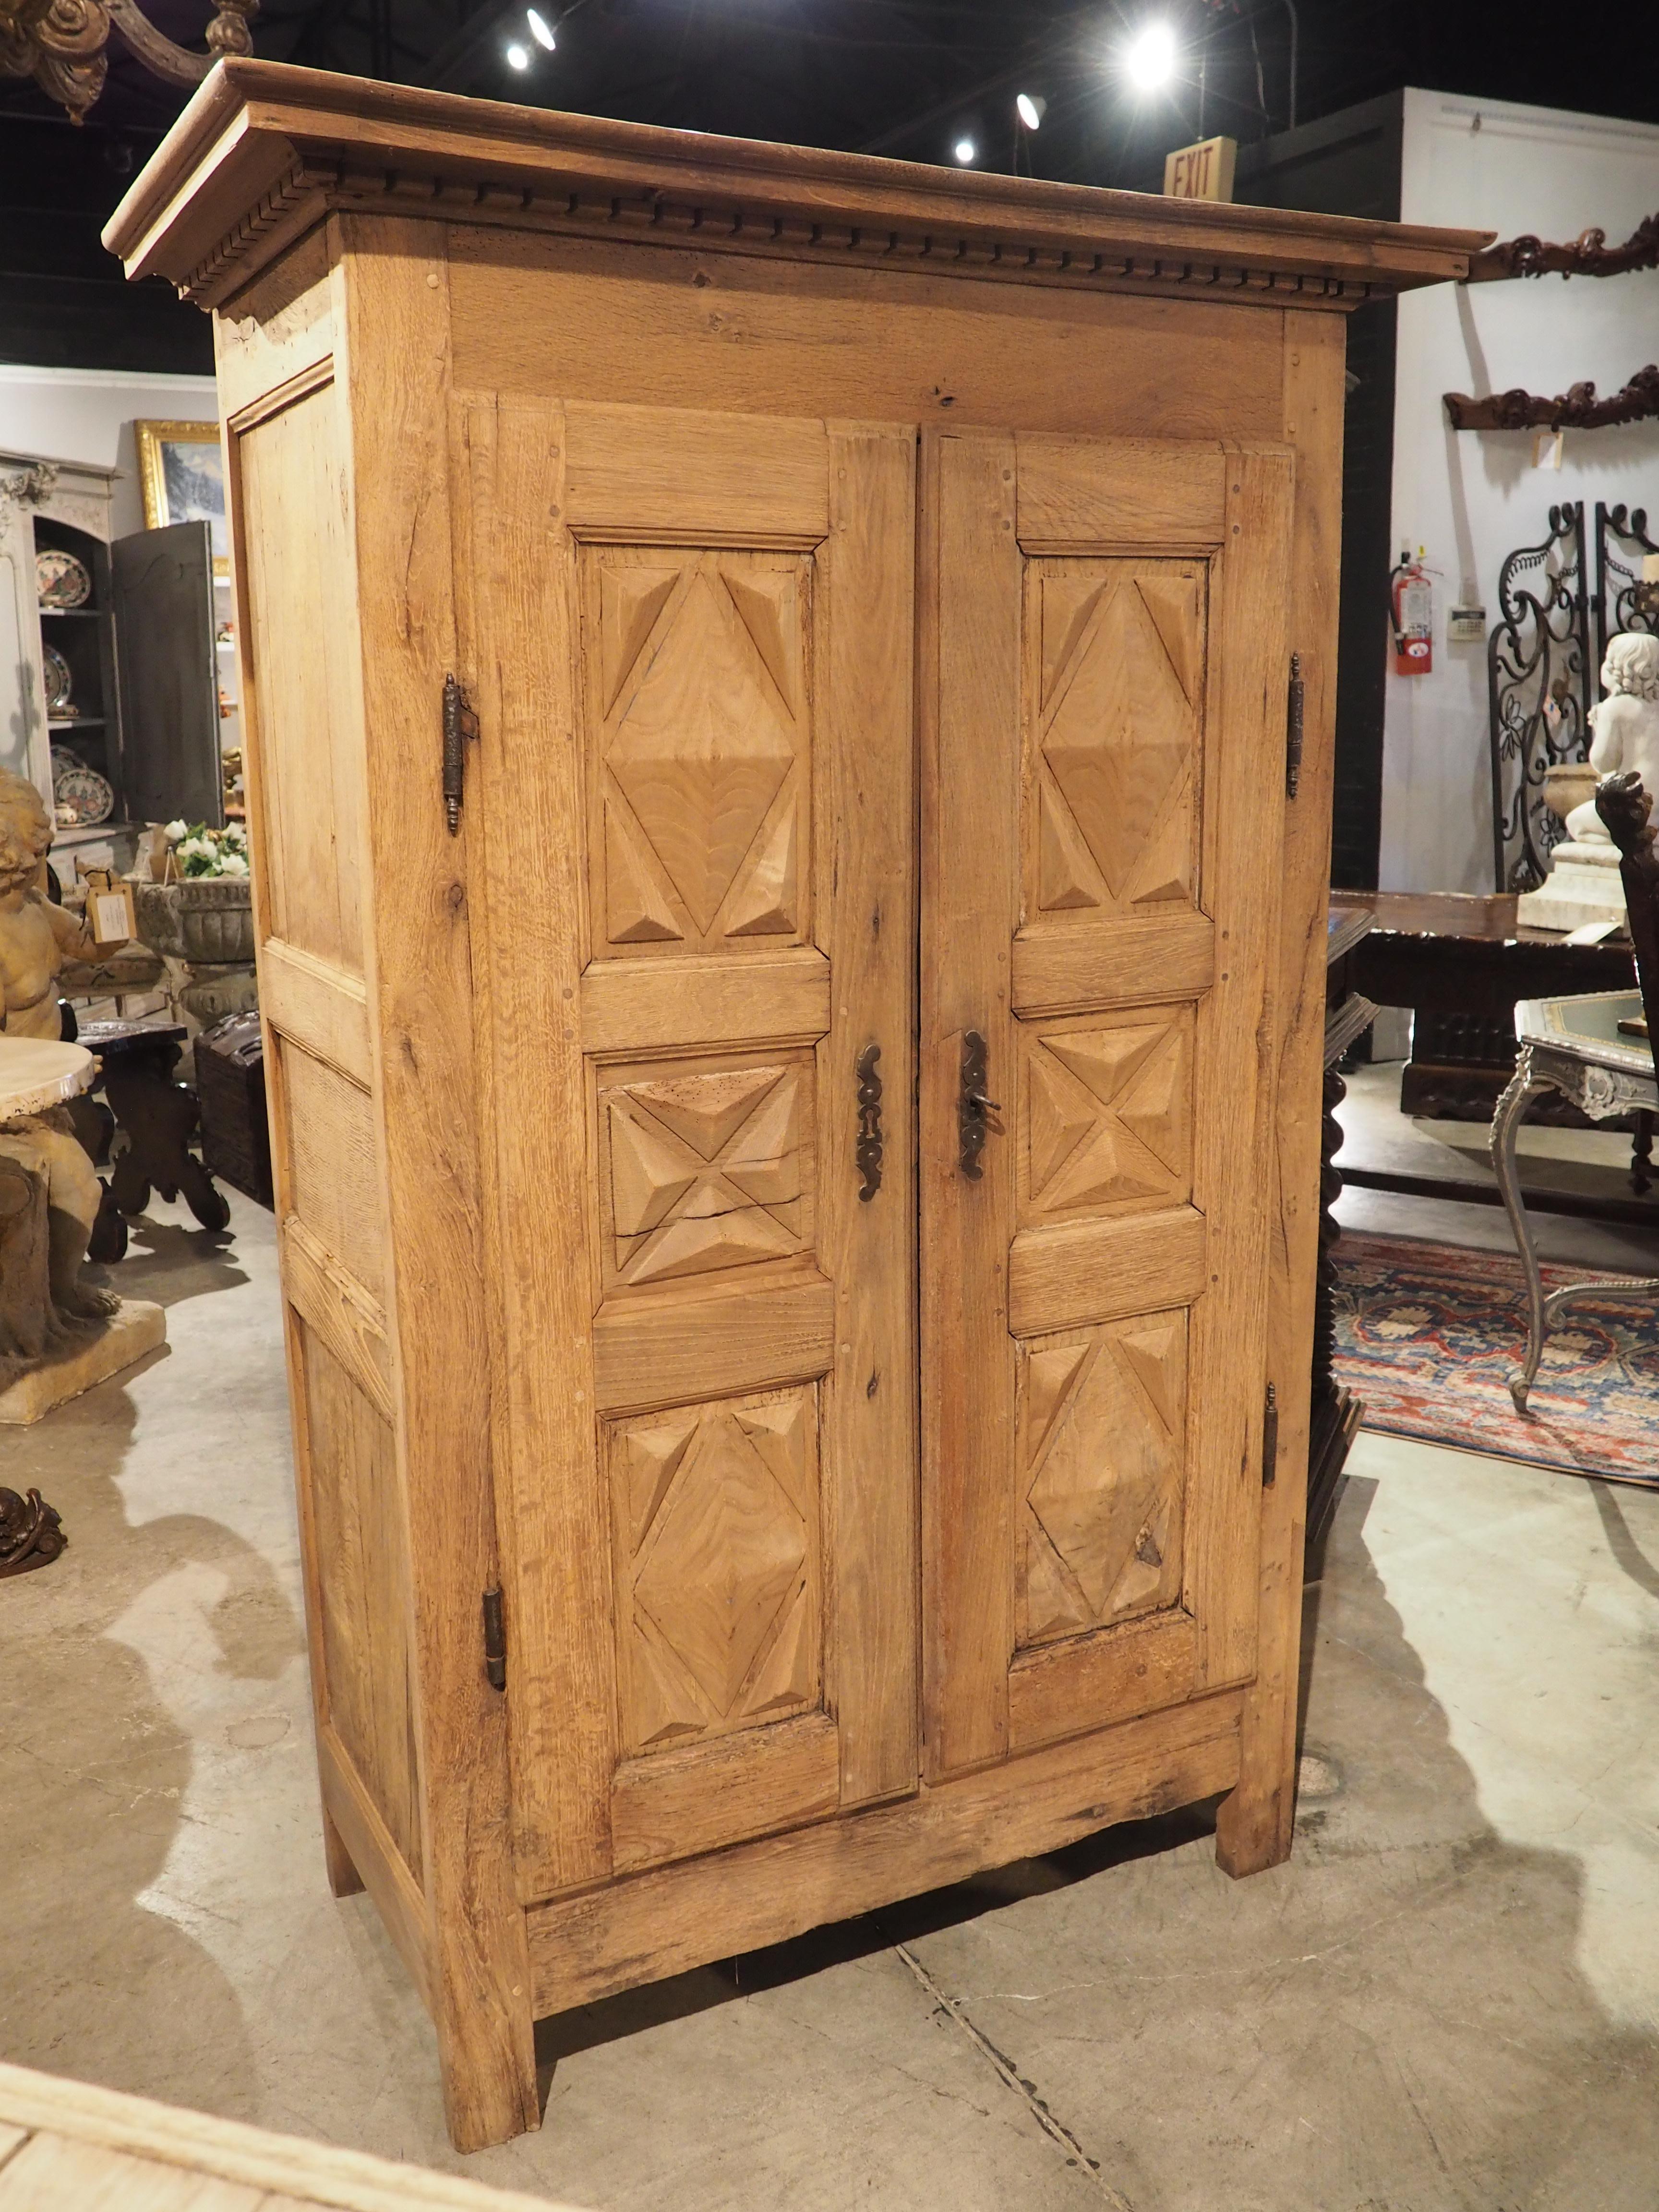 This unique armoire was hand-carved from oak and chestnut wood in Brittany, France, during the 1800’s. Carved in the Louis XIII style (notice the geometric shaped moldings), the two motifs on the doors make this a rare find, as typically ebenistes